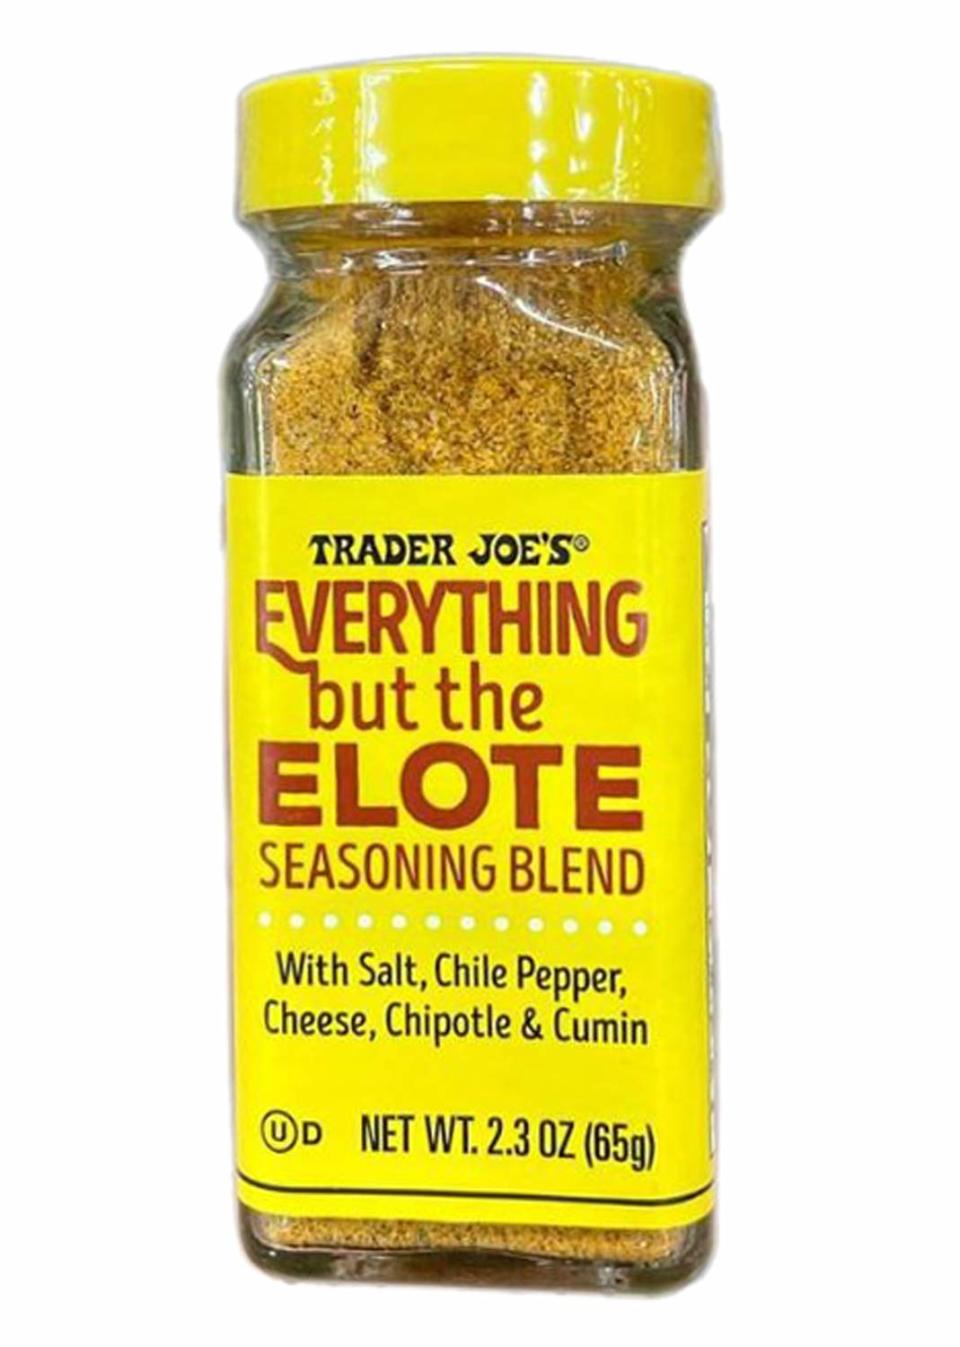 Everything but the Elote Seasoning Blend